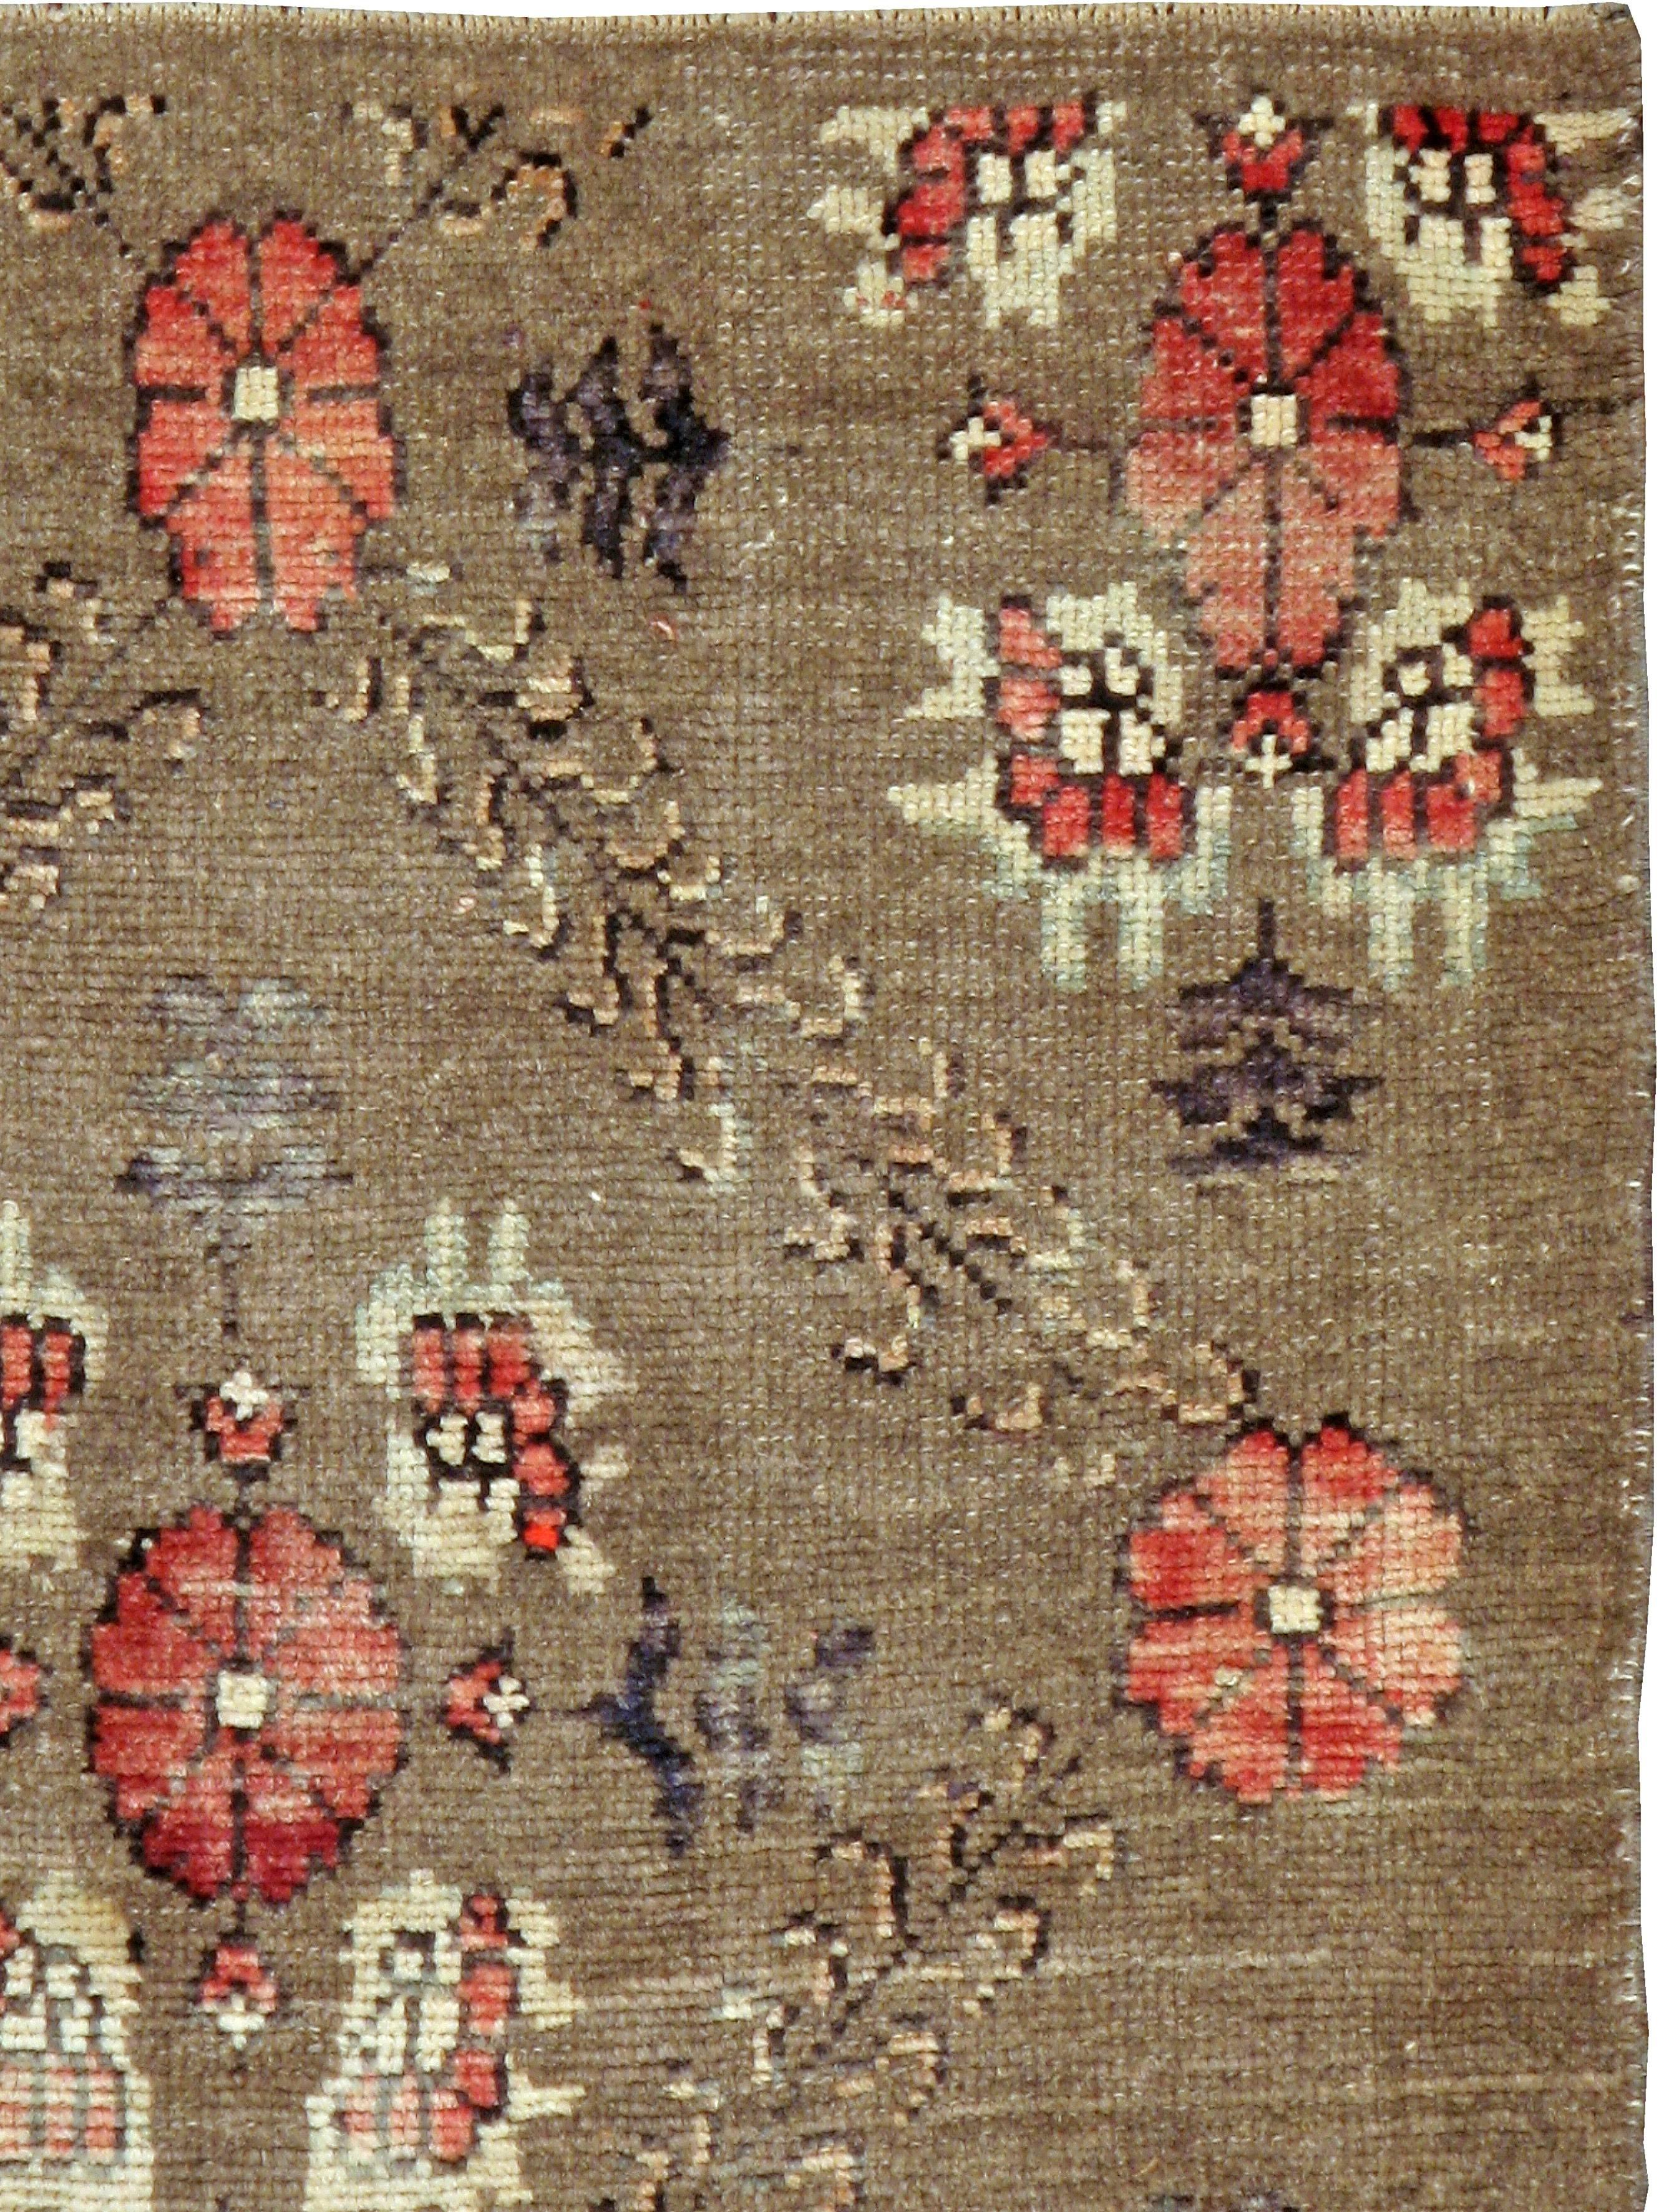 A vintage Turkish carpet from the second quarter of the 20th century.